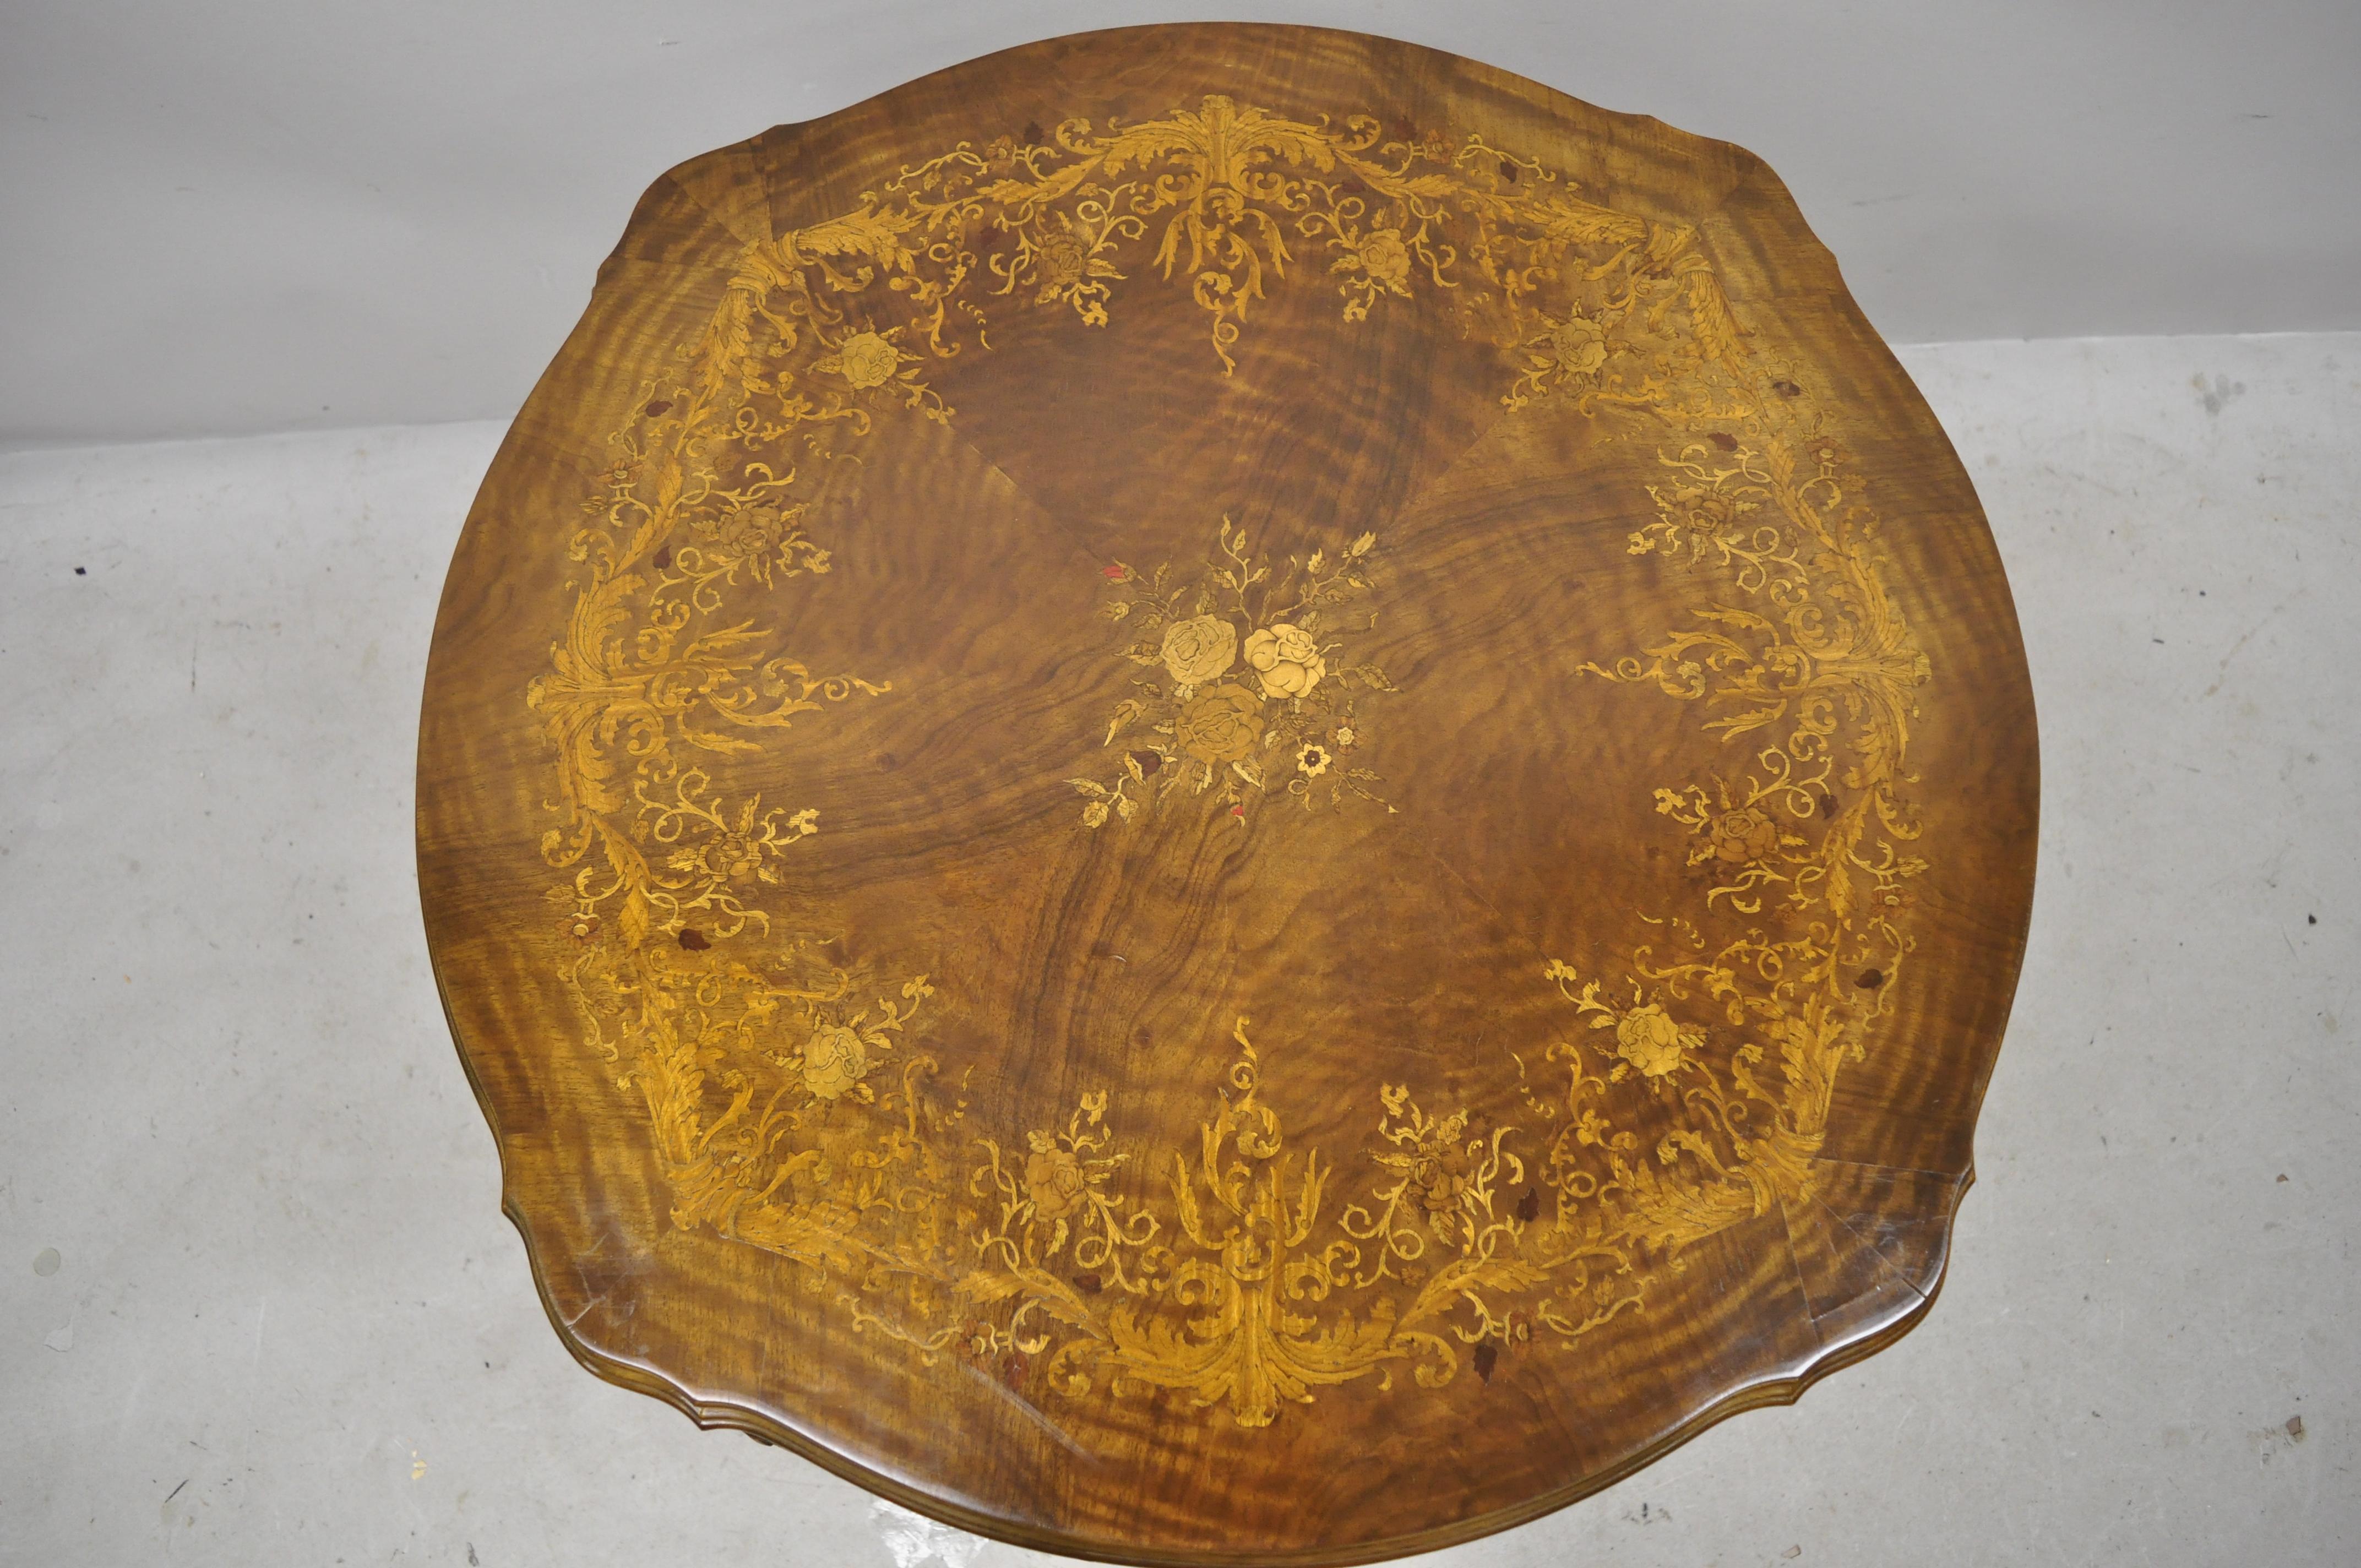 Vintage French Louis XV style floral satinwood inlay round walnut coffee table side table. Item features floral satinwood inlay, nicely carved details, cabriole legs, very nice antique item, quality craftsmanship, great style and form, circa early